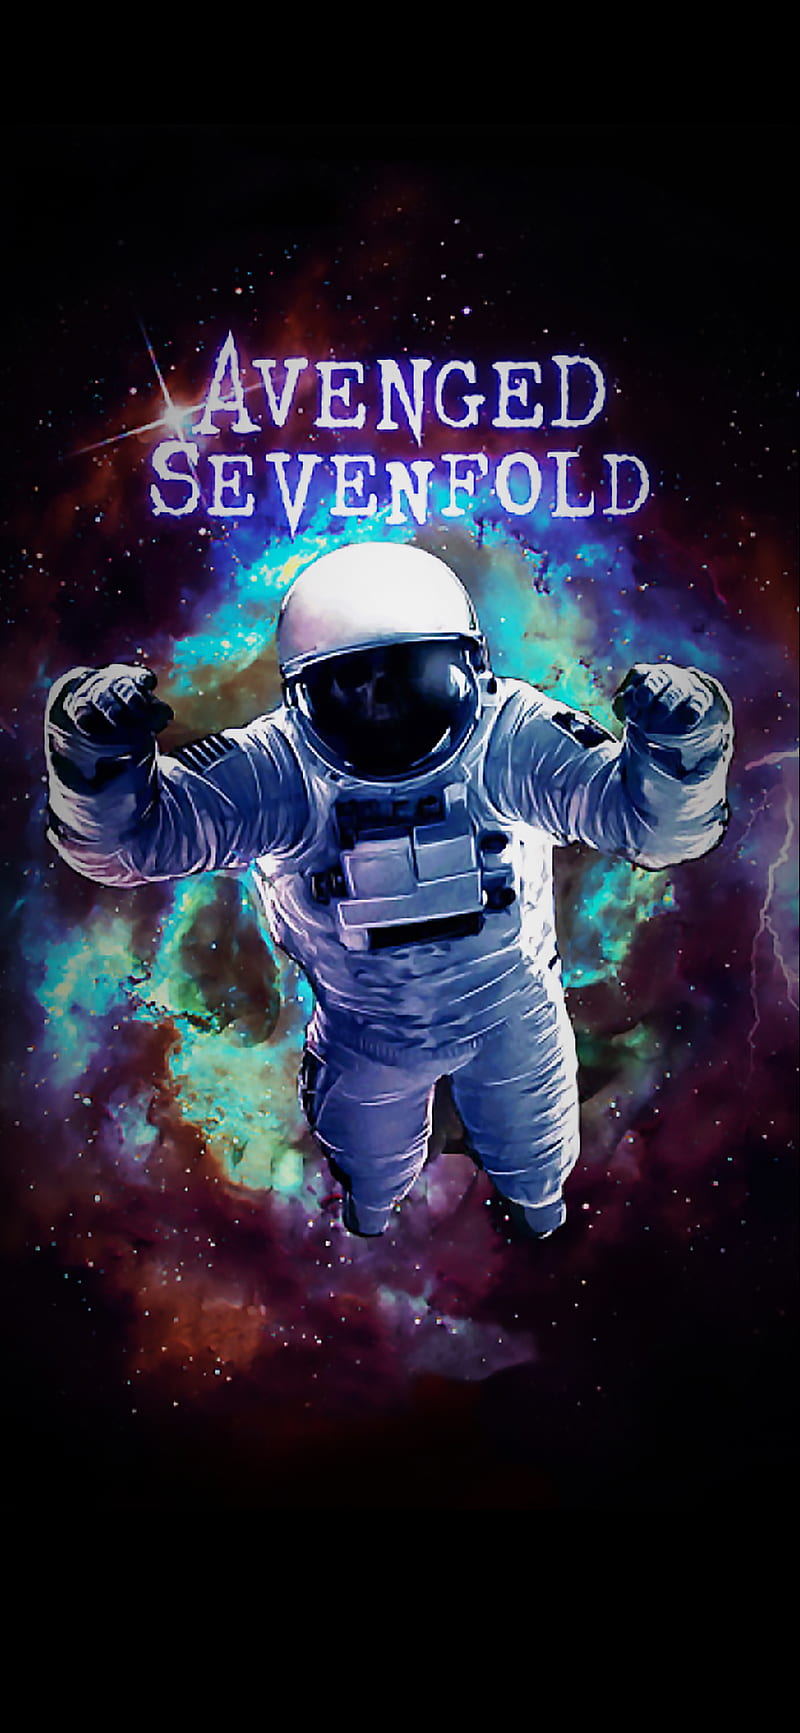 avenged sevenfold, a7x, a7x cover, astronaut, cd cover, space, the stage, HD phone wallpaper